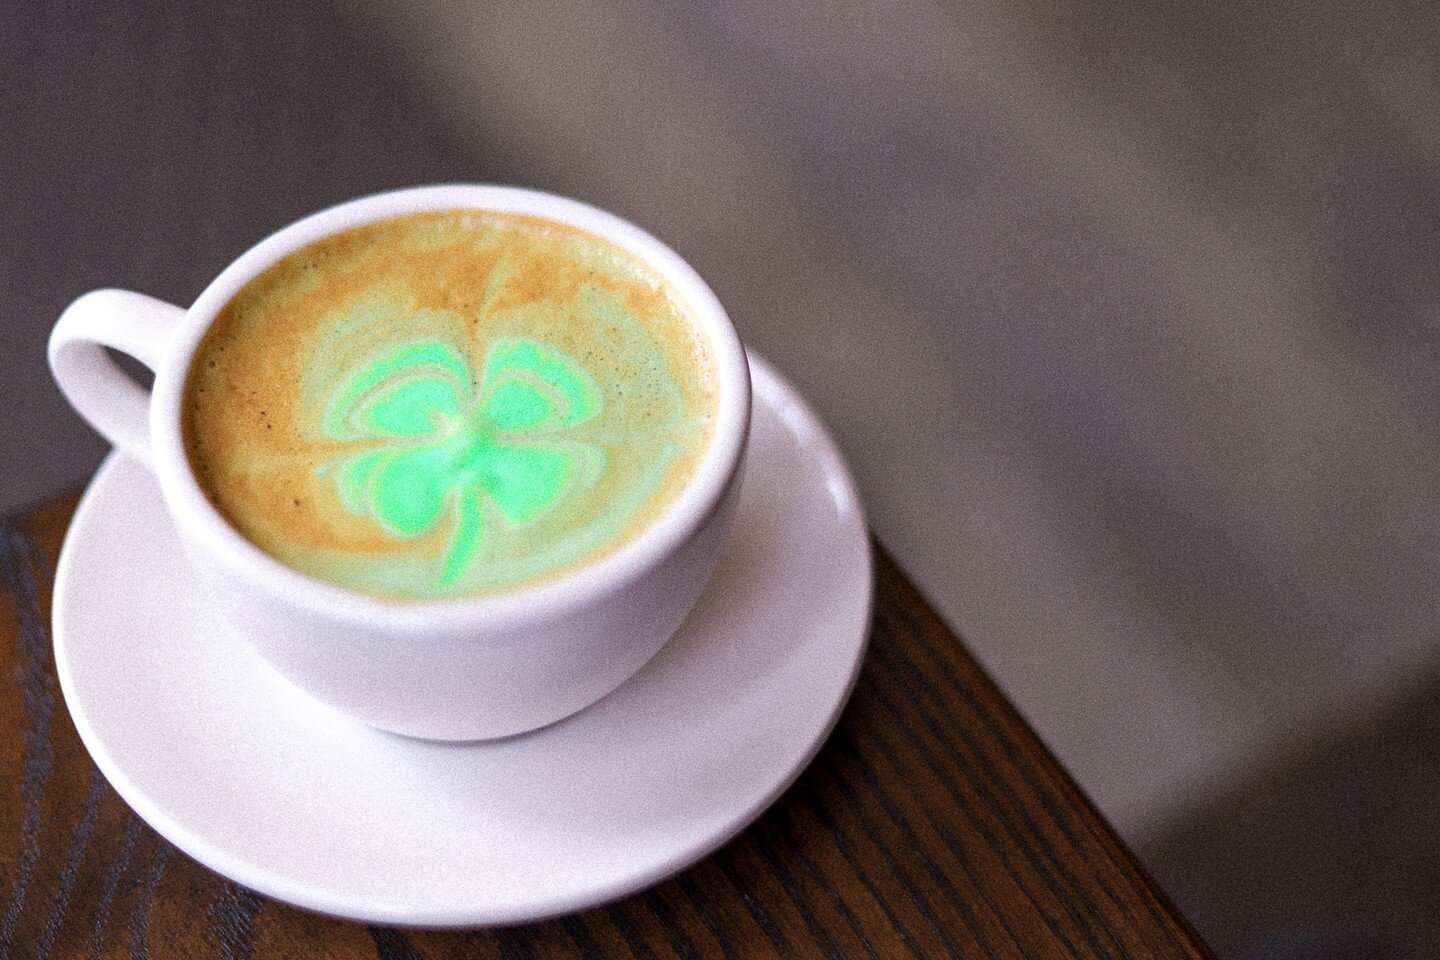 🍀&quot;May the roof above us never fall in.
And may the friends gathered below it never fall out.&quot;🍀

Happy St. Patricks Day!!

In honor of our owners personal holiday (his opinion), check out our St. Patricks Day specials!!

-Leprechaun latte 